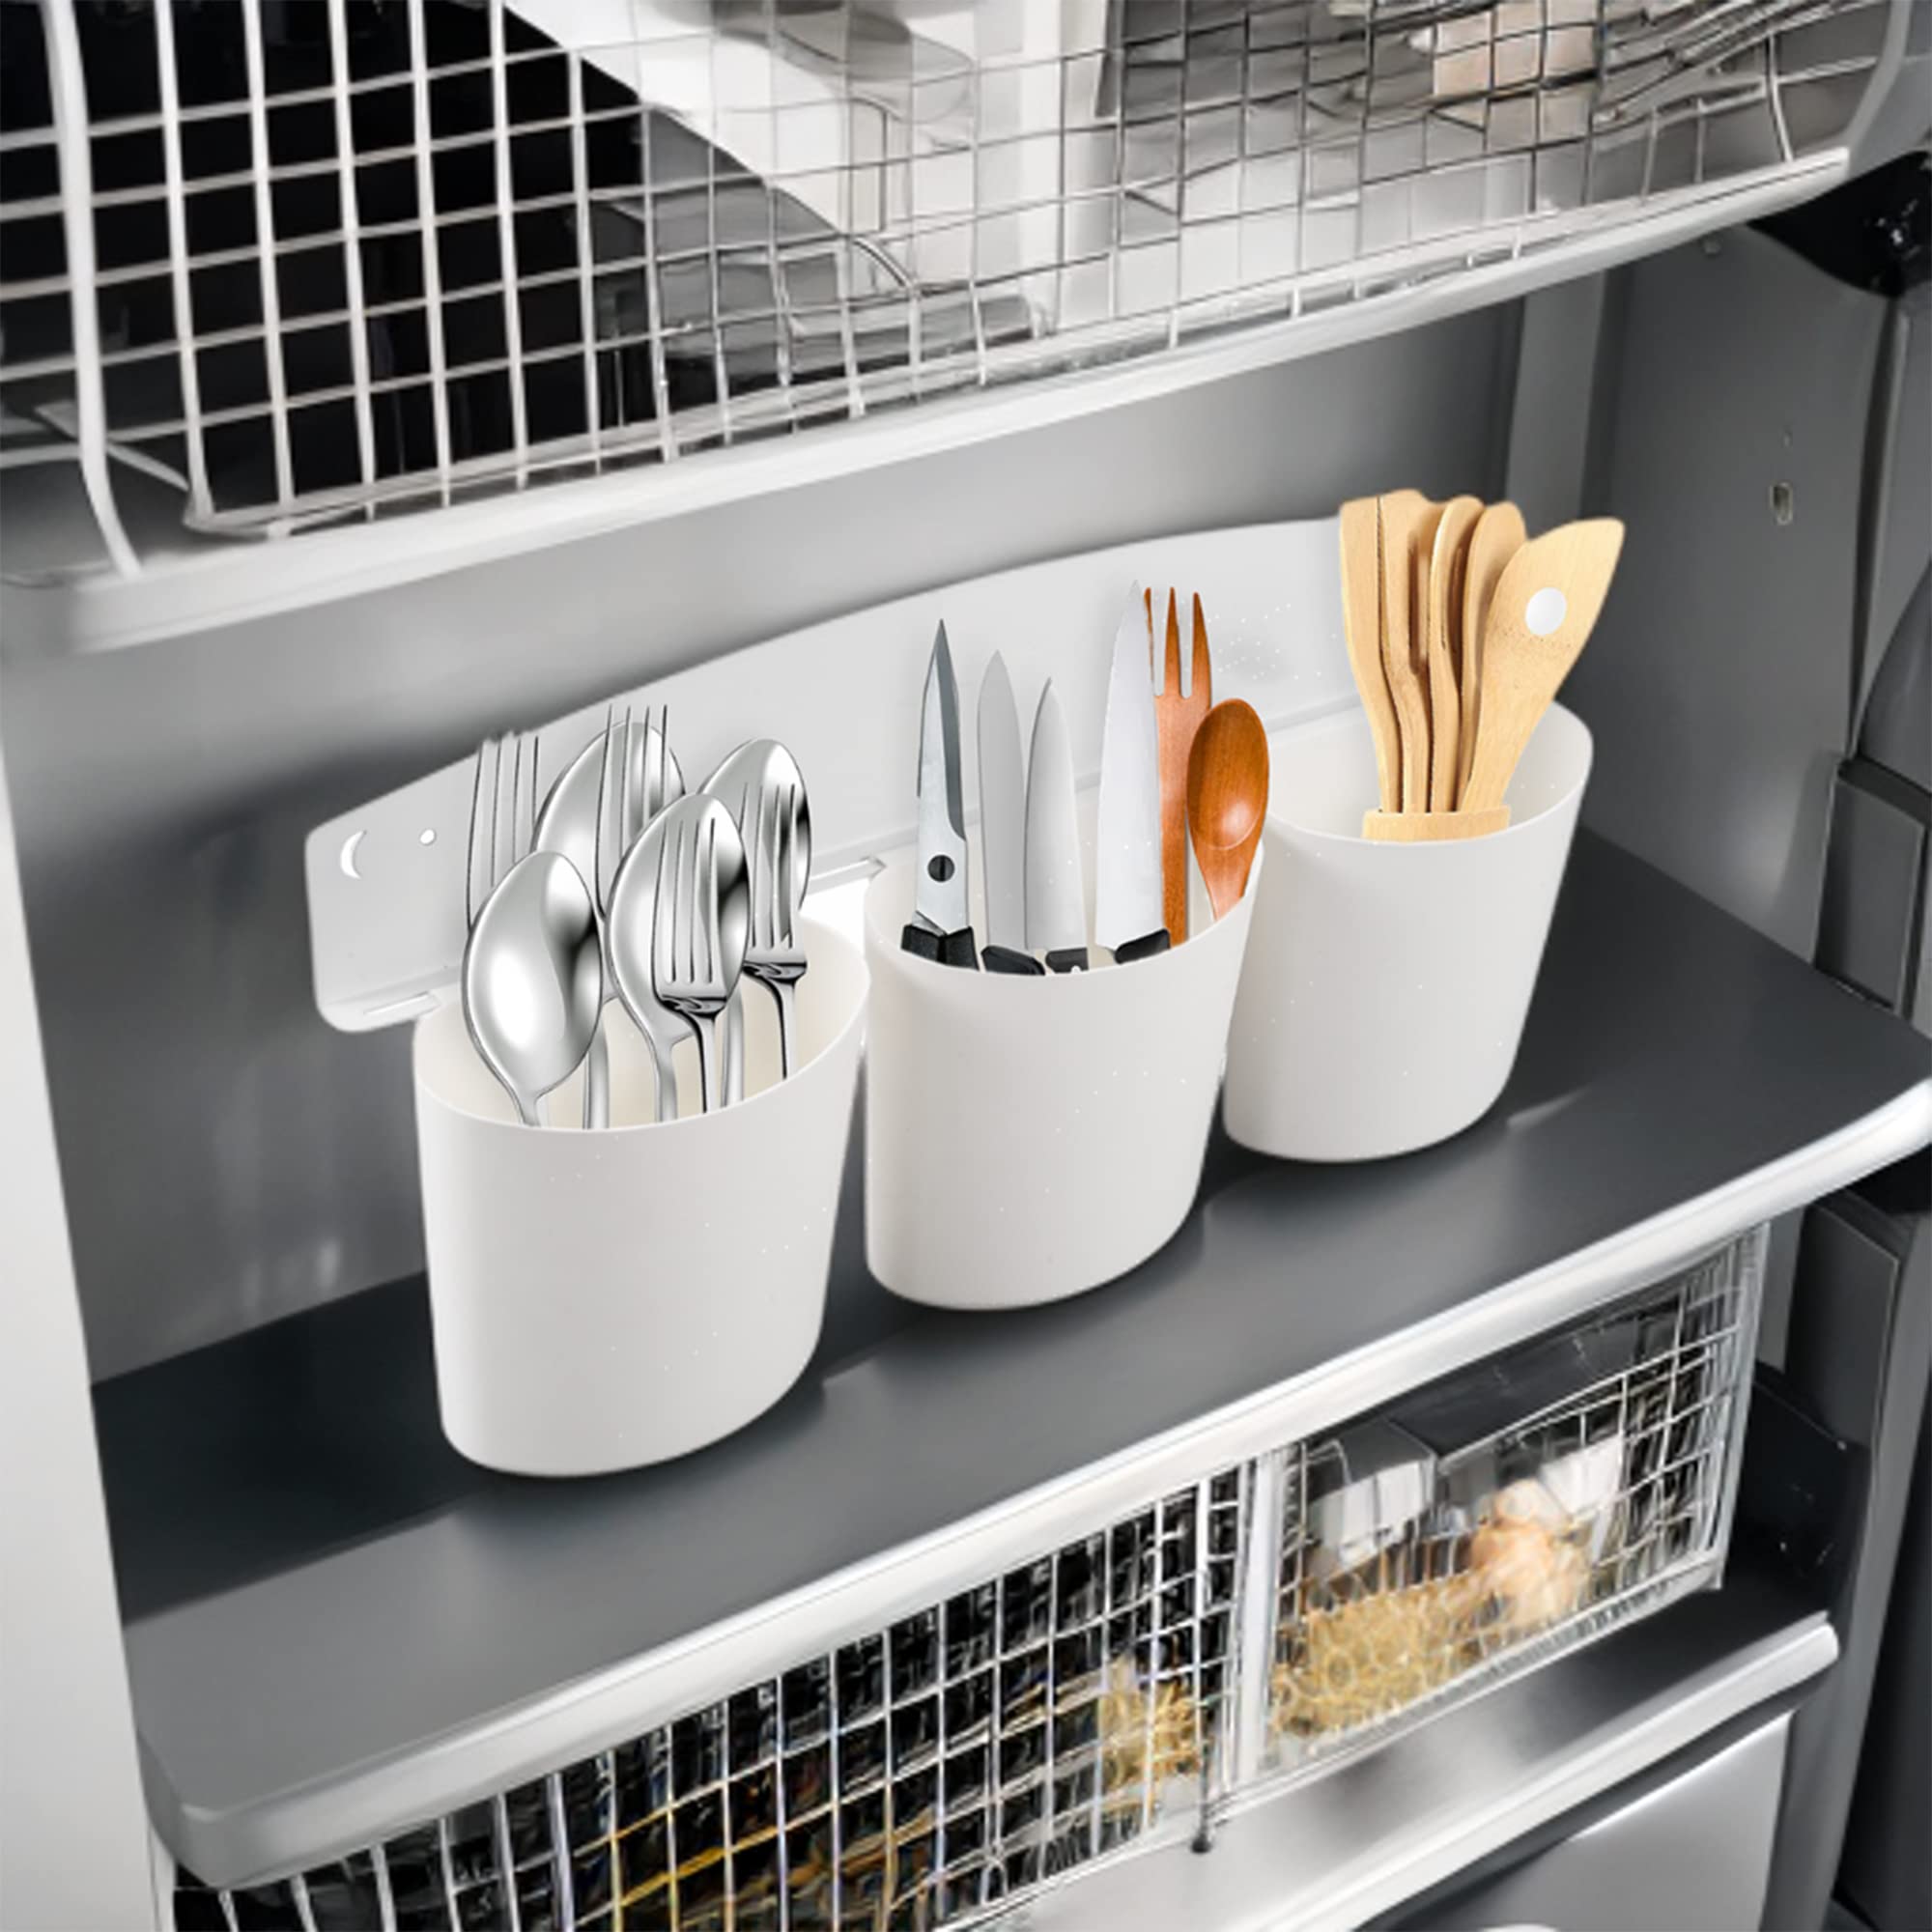 CHESTON Magnetic Fridge Storage - Durable Organizer for Metal Surfaces: Refrigerators, Microwaves, Metal Almirah - Load-Bearing 5kg - Ideal for Cutlery & Stationery